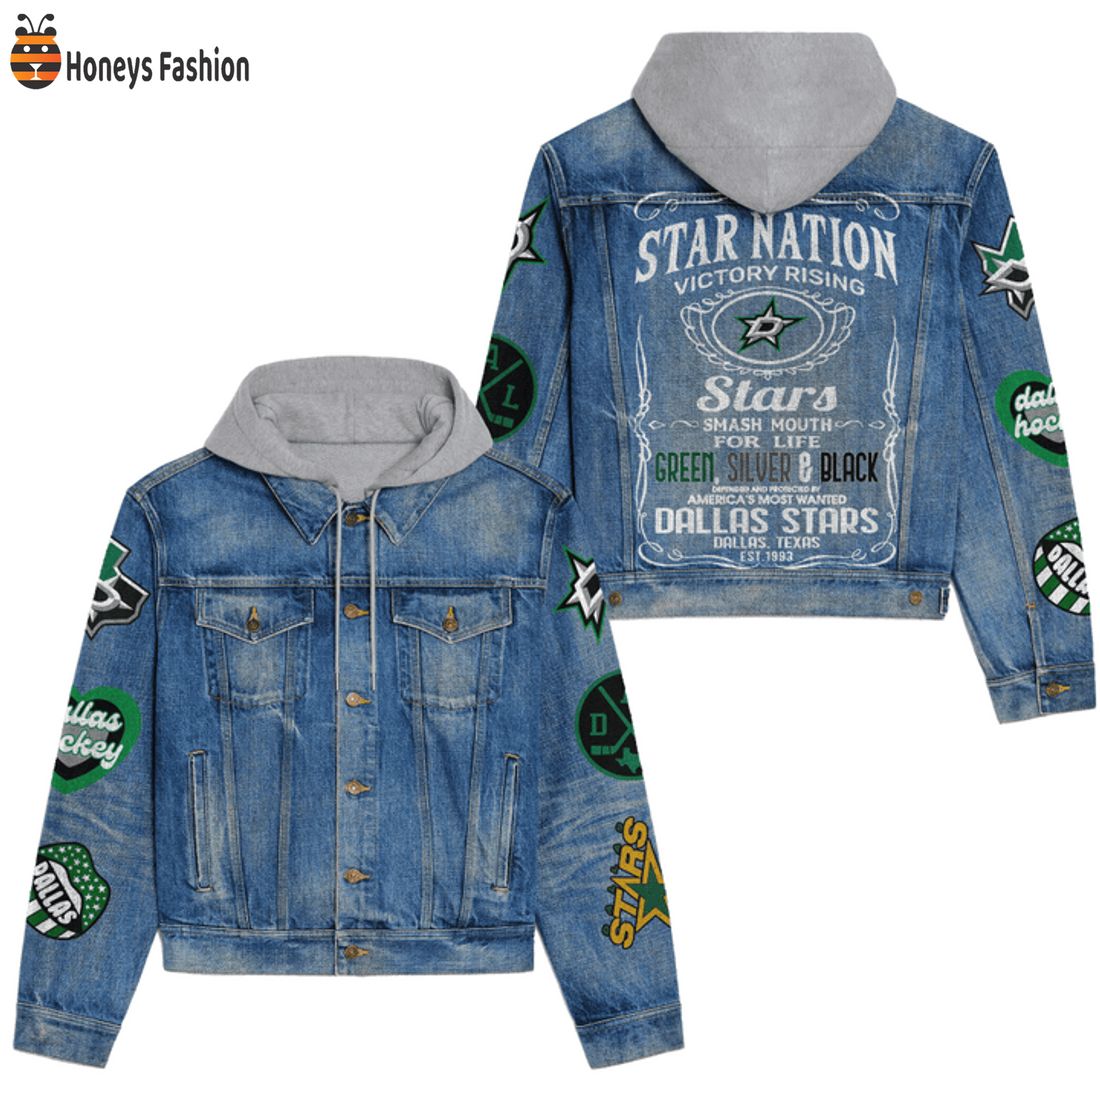 HOT Dallas Stars Nation Victory Rising Smash Mouth For Life Hooded Denim Jacket